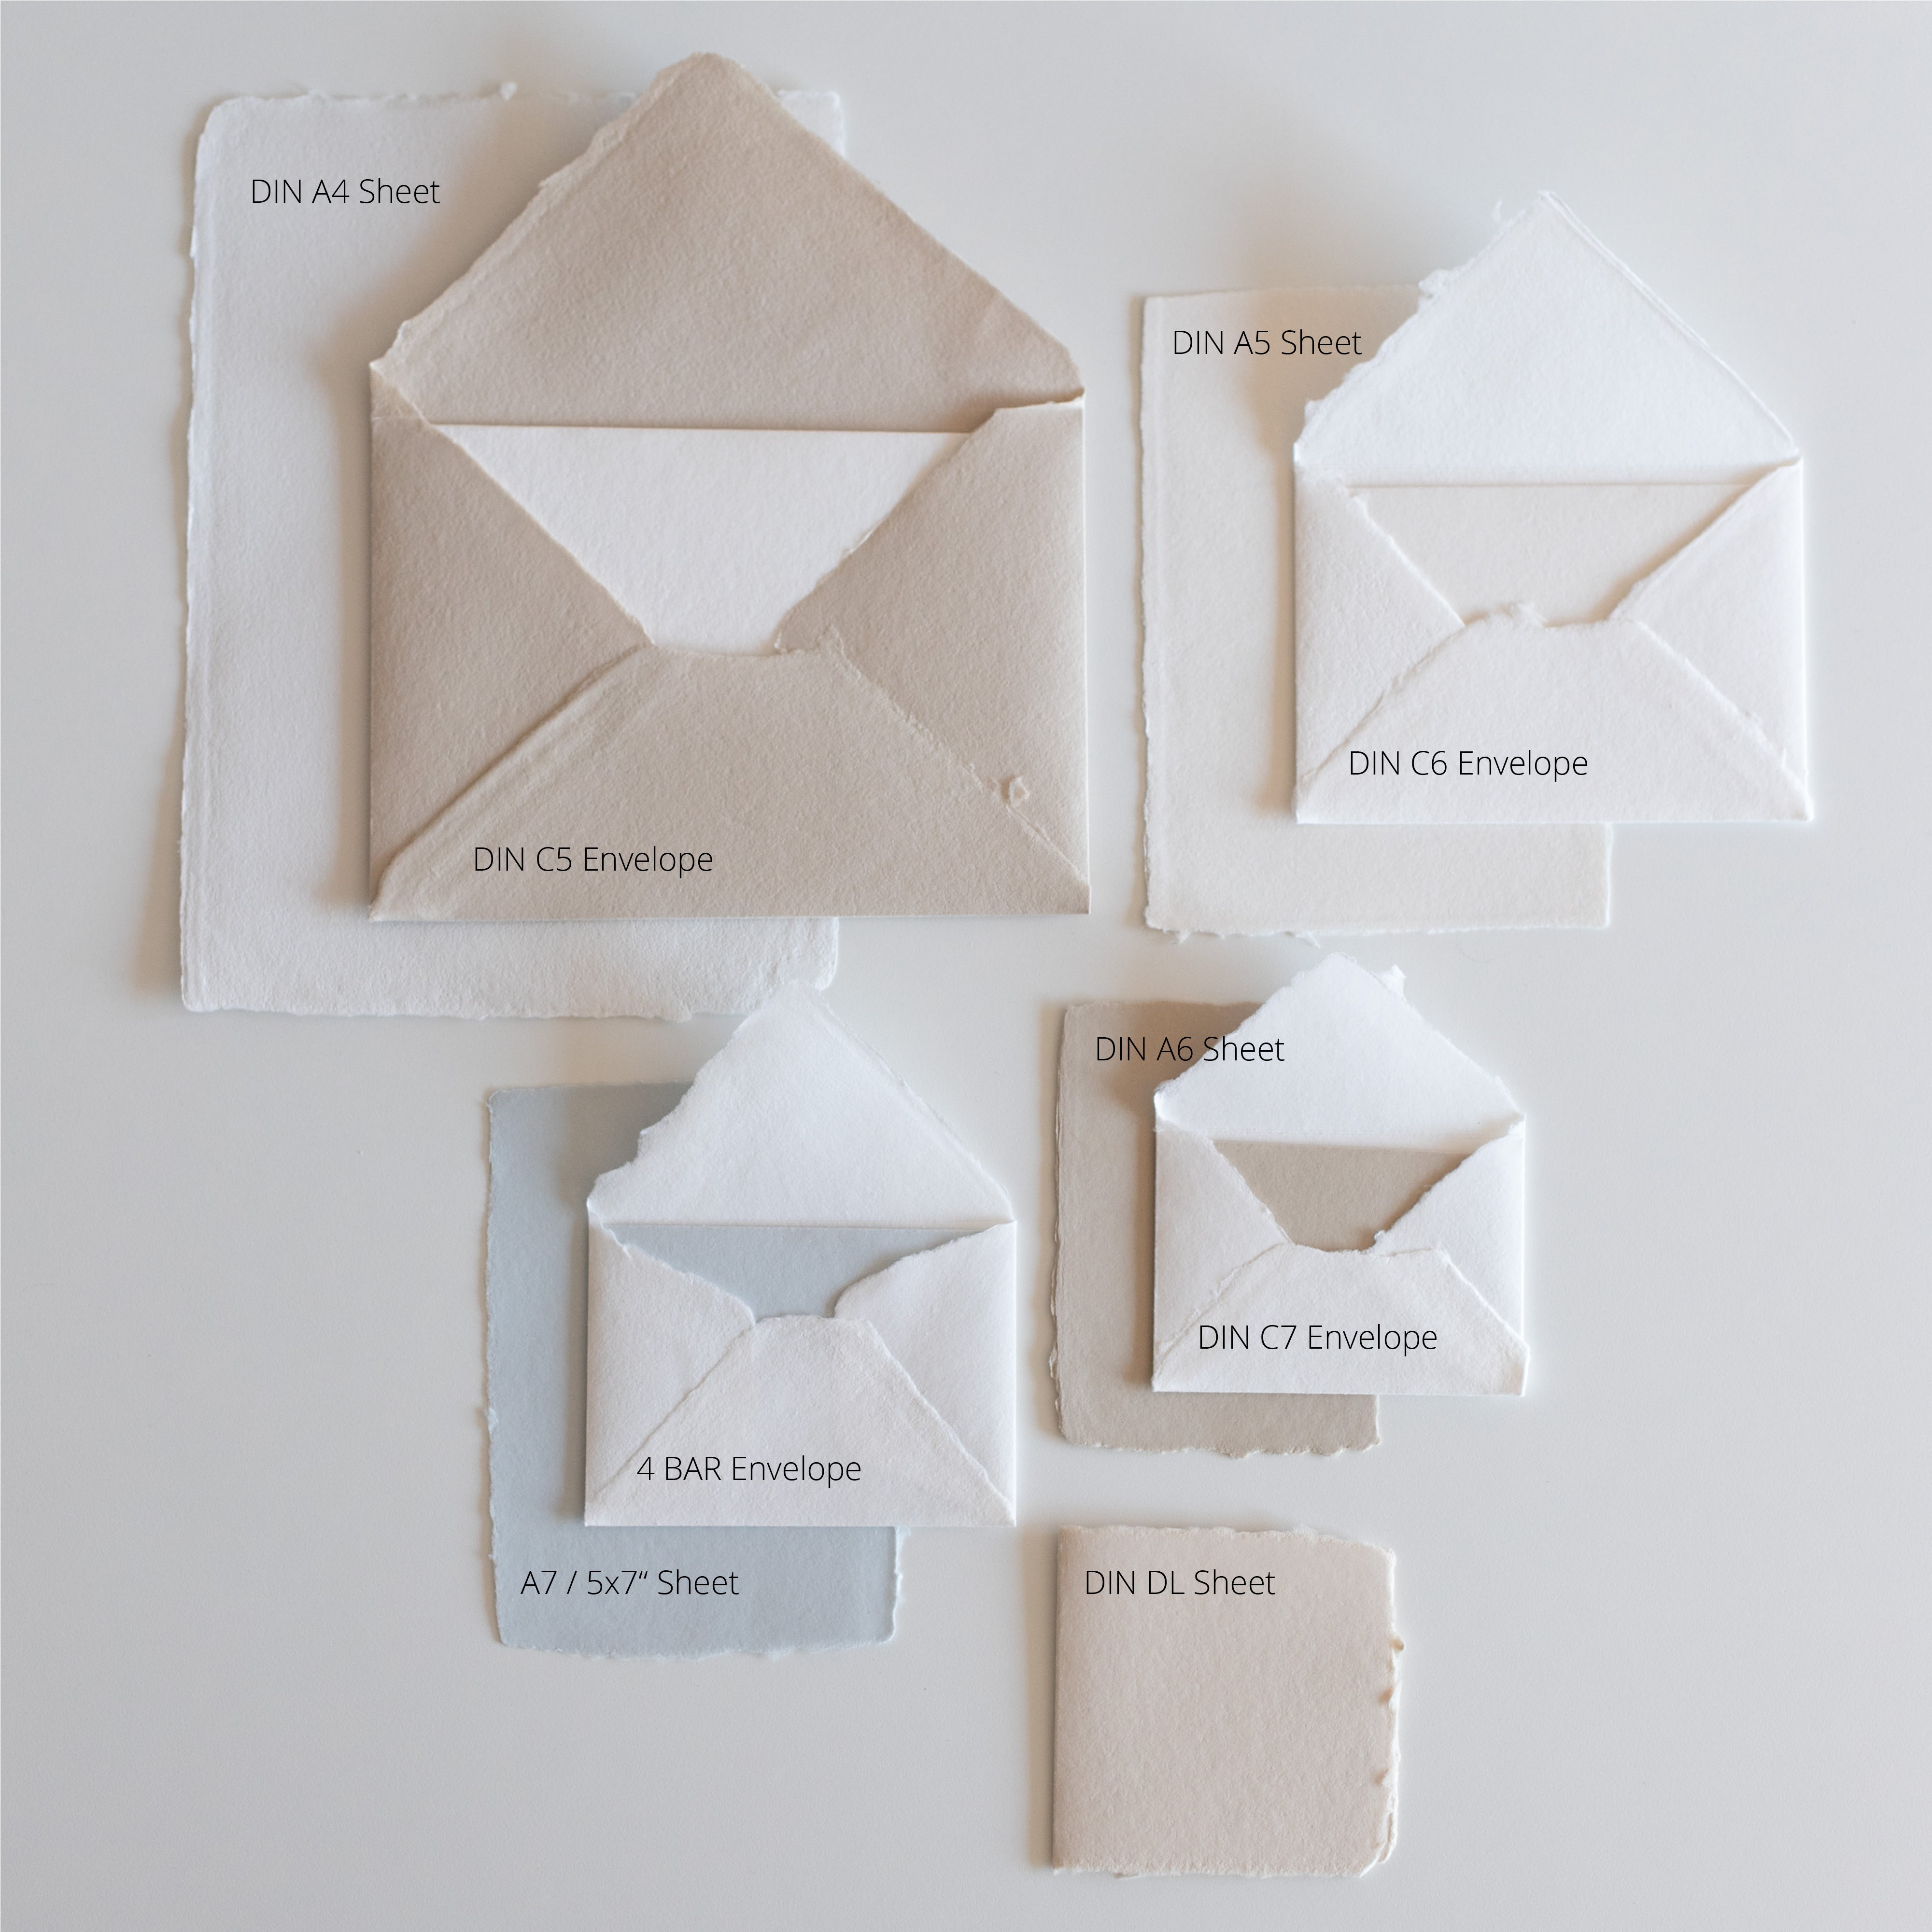 HOW TO MAKE YOUR OWN FOLDED CARDS FROM HANDMADE PAPER – Eliv Rosenkranz